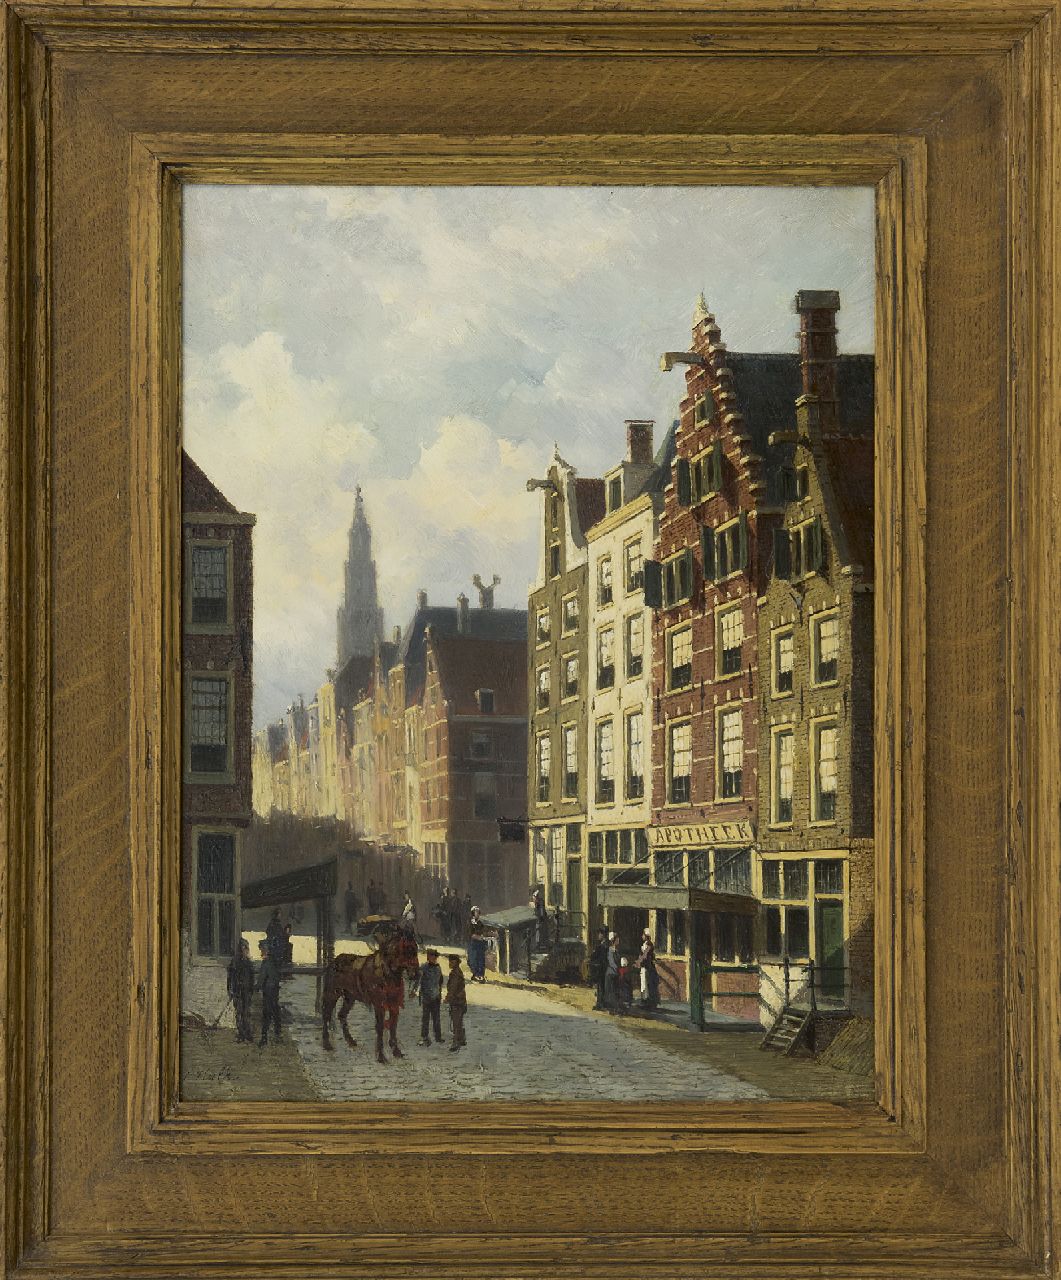 Hulk sr. J.F.  | Johannes Frederik Hulk sr. | Paintings offered for sale | A sunny town view with a pharmacy shop, oil on panel 40.0 x 31.7 cm, signed l.l.